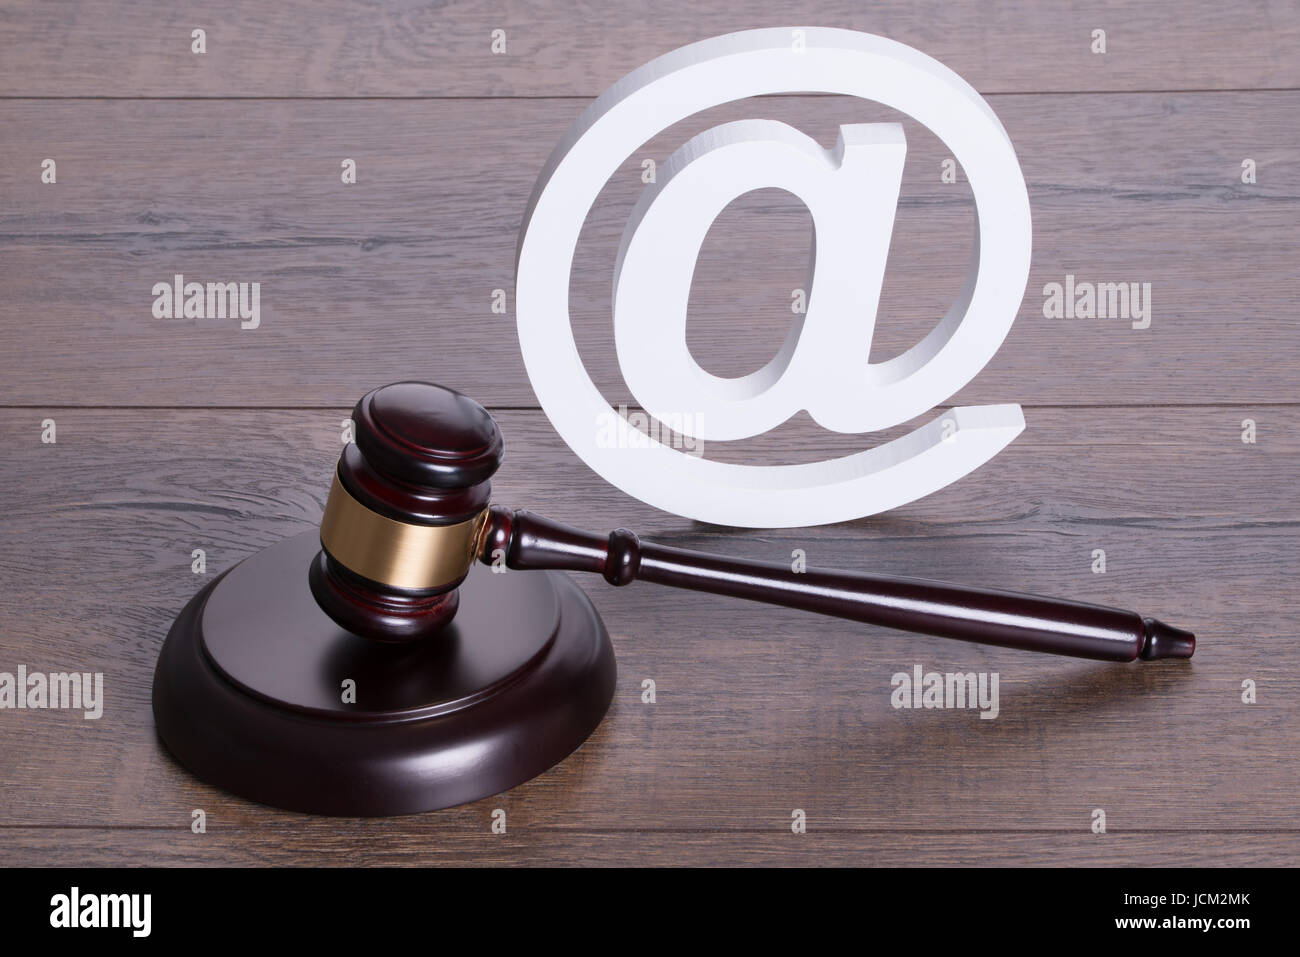 Judge gavel and at symbol representing online crime concept Stock Photo